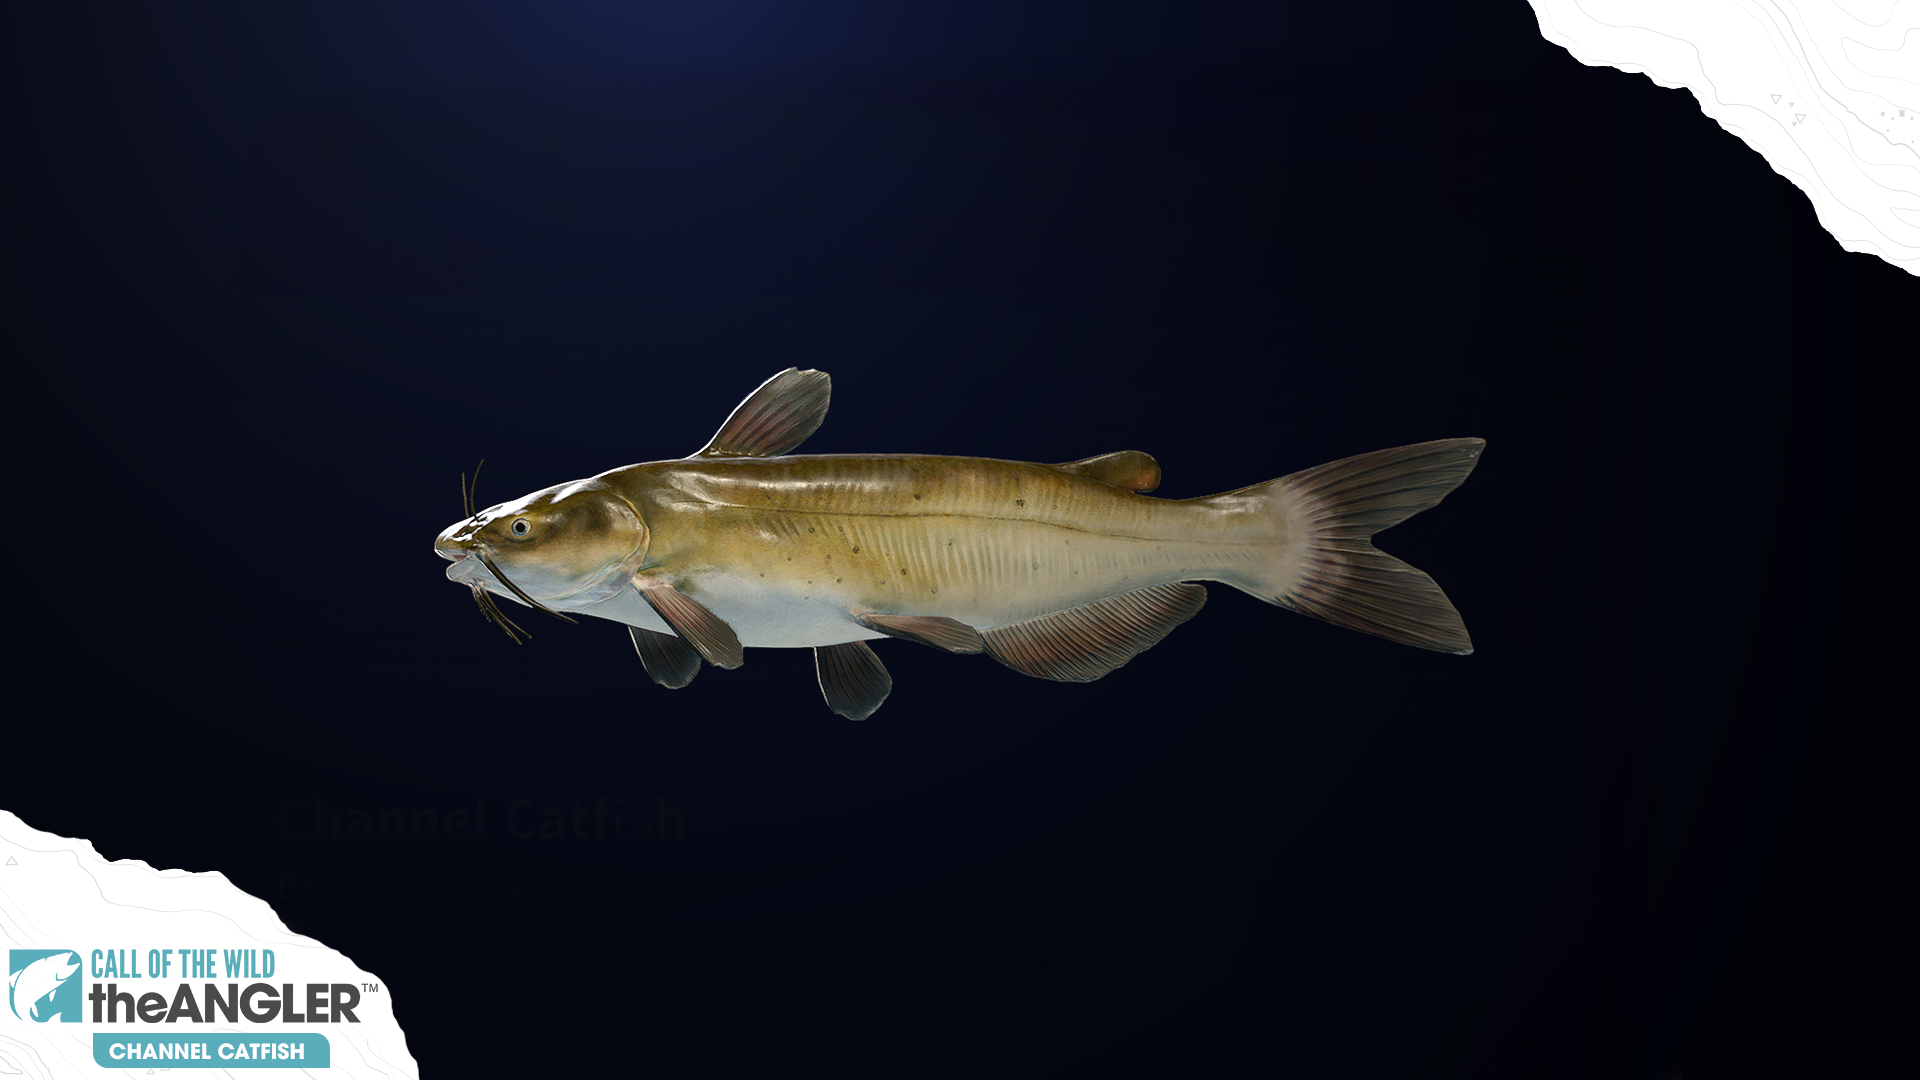 An image of the fish species, Channel Catfish.